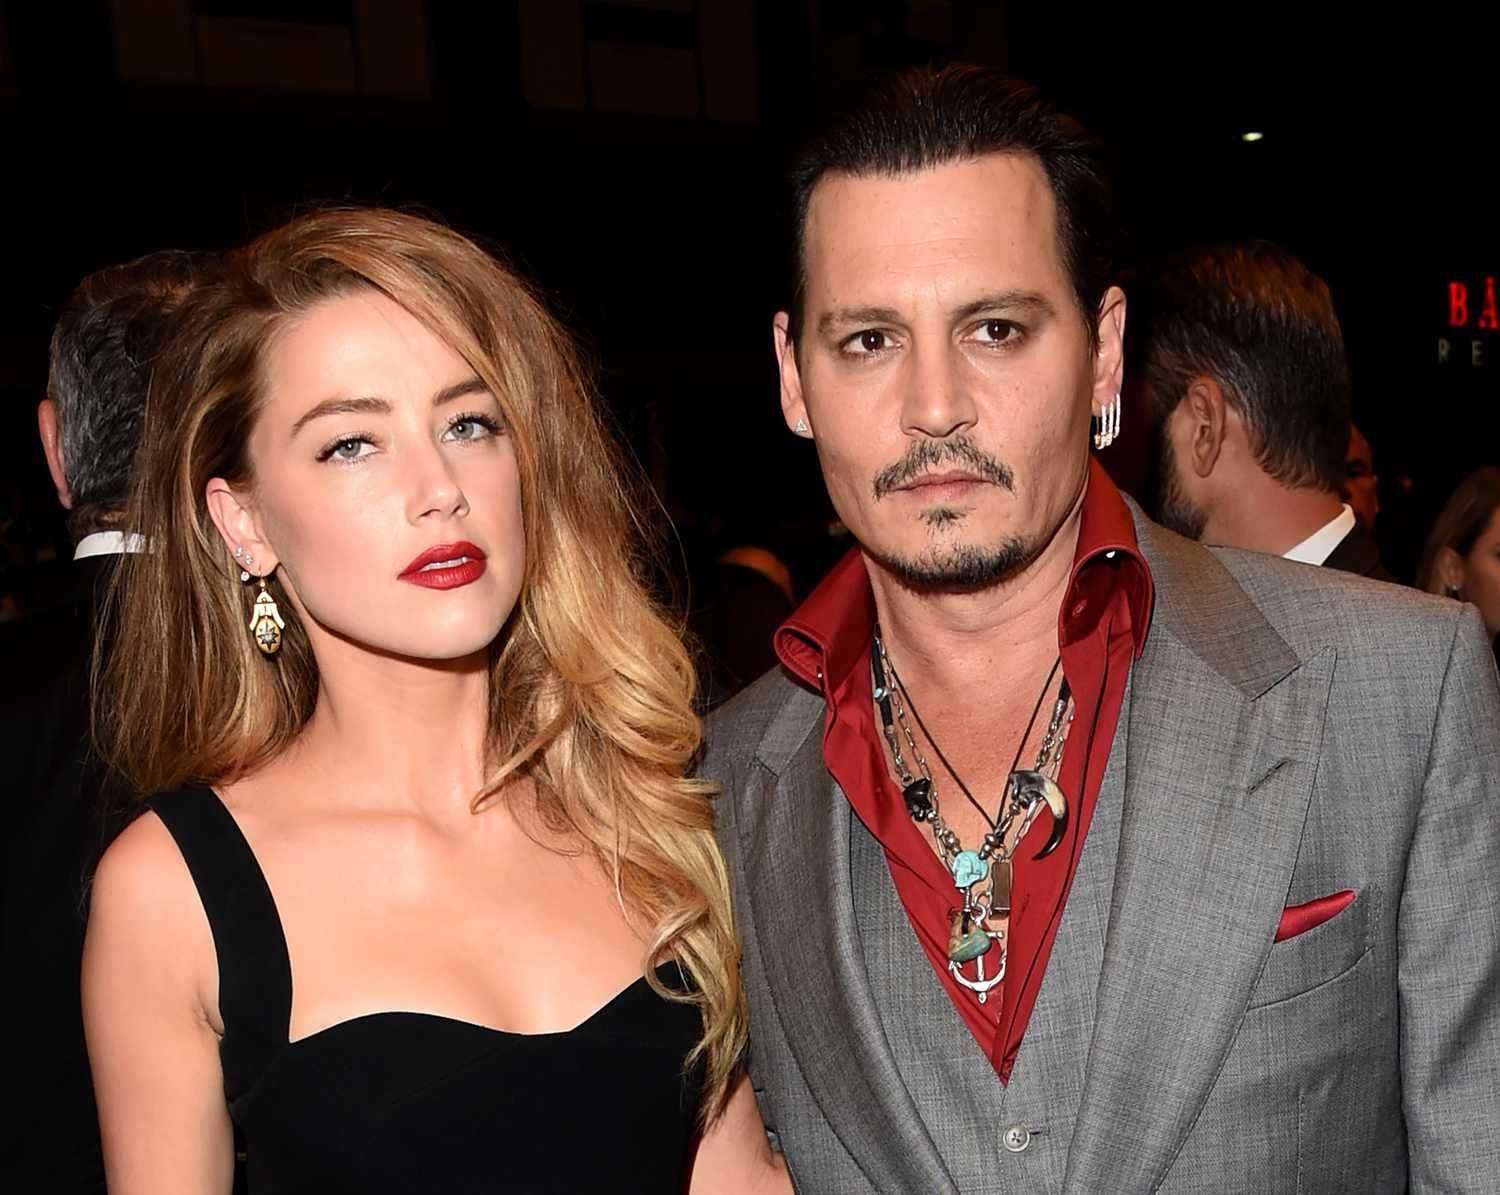 Amber Heard And Johnny Depp A Tumultuous Love Affair Revisited